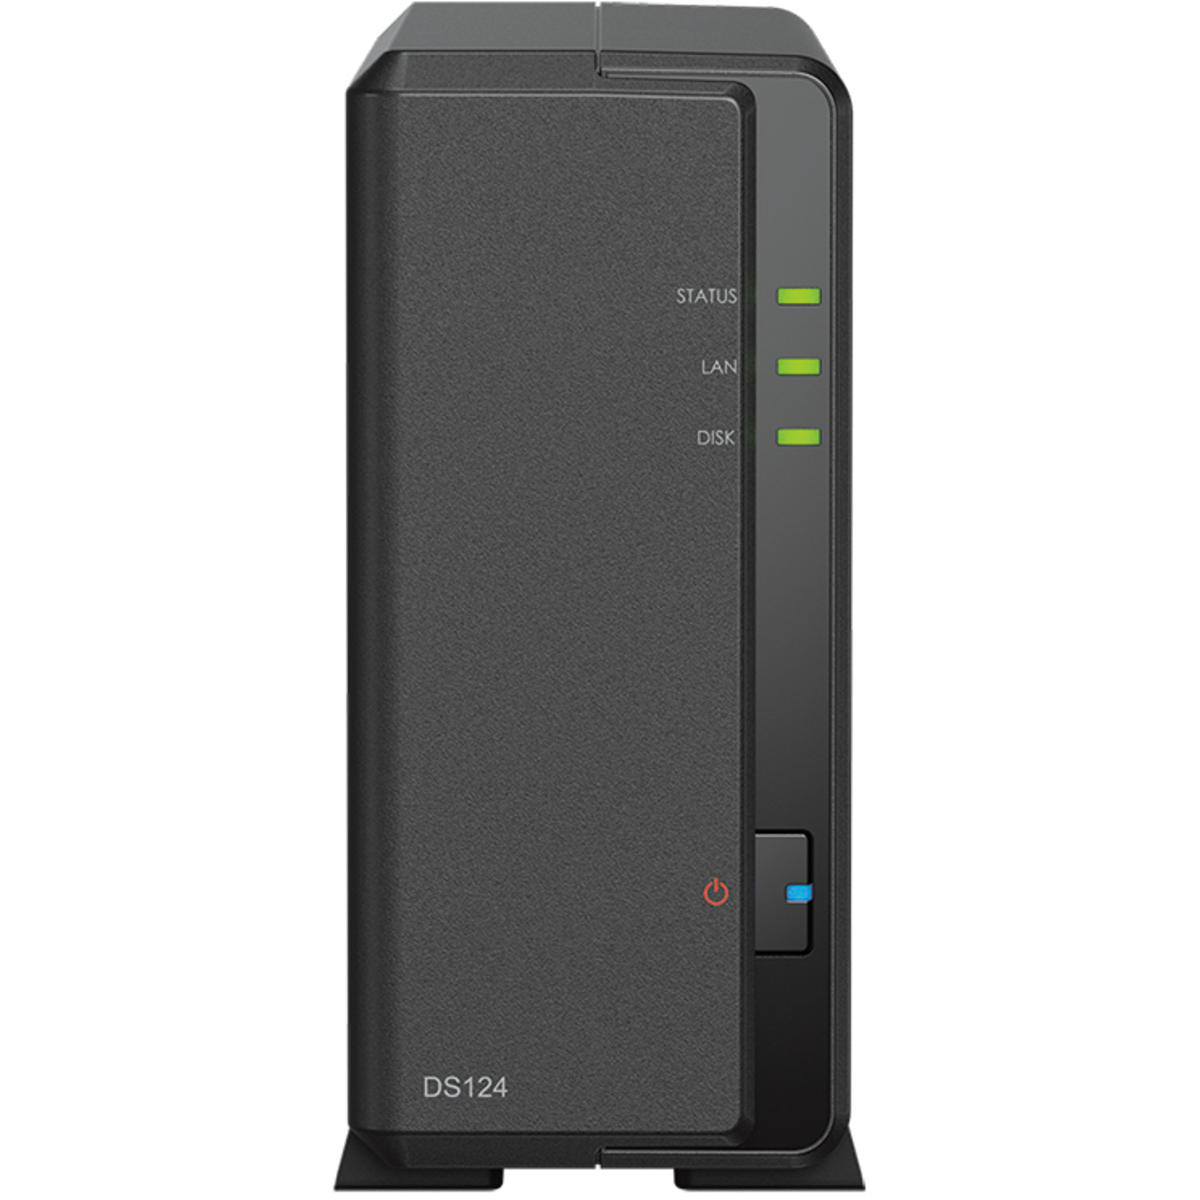 Synology DiskStation DS124 10tb 1-Bay Desktop Personal / Basic Home / Small Office NAS - Network Attached Storage Device 1x10tb Western Digital Red Plus WD101EFBX 3.5 7200rpm SATA 6Gb/s HDD NAS Class Drives Installed - Burn-In Tested DiskStation DS124